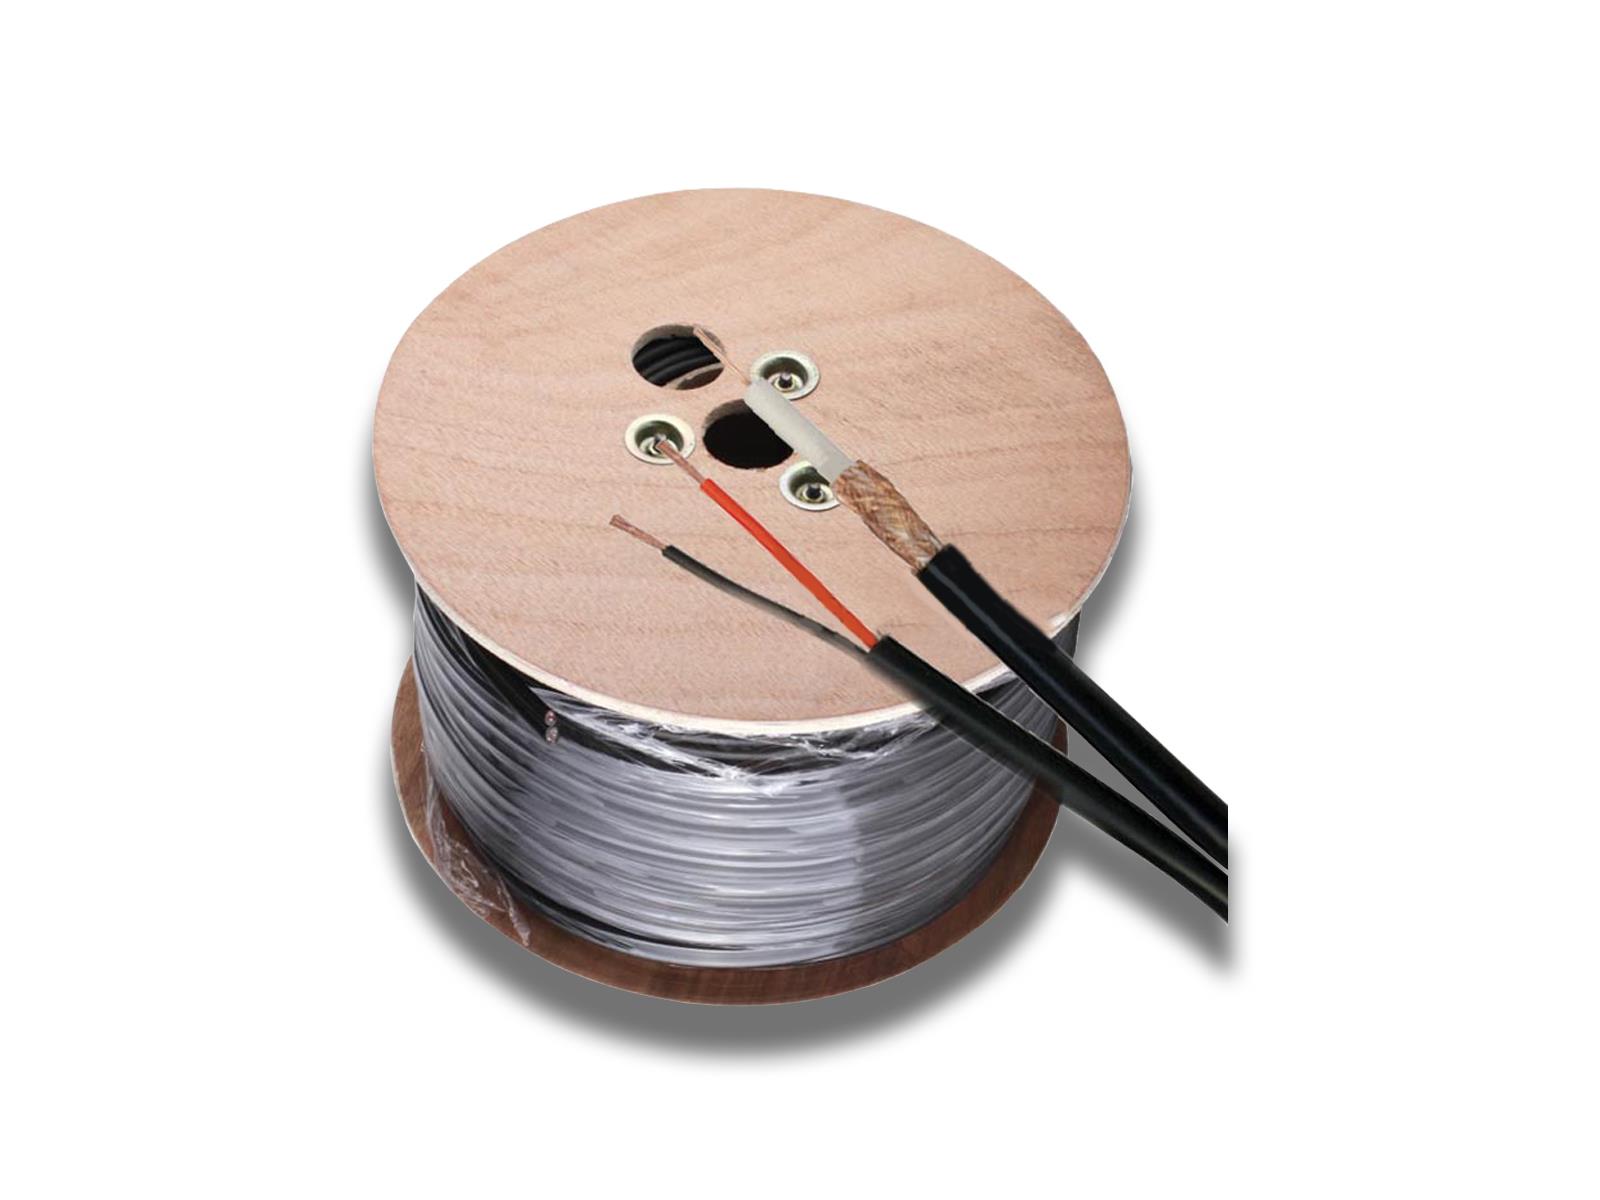 High Quality RG59 Coaxial Cable With 2 Power Cables